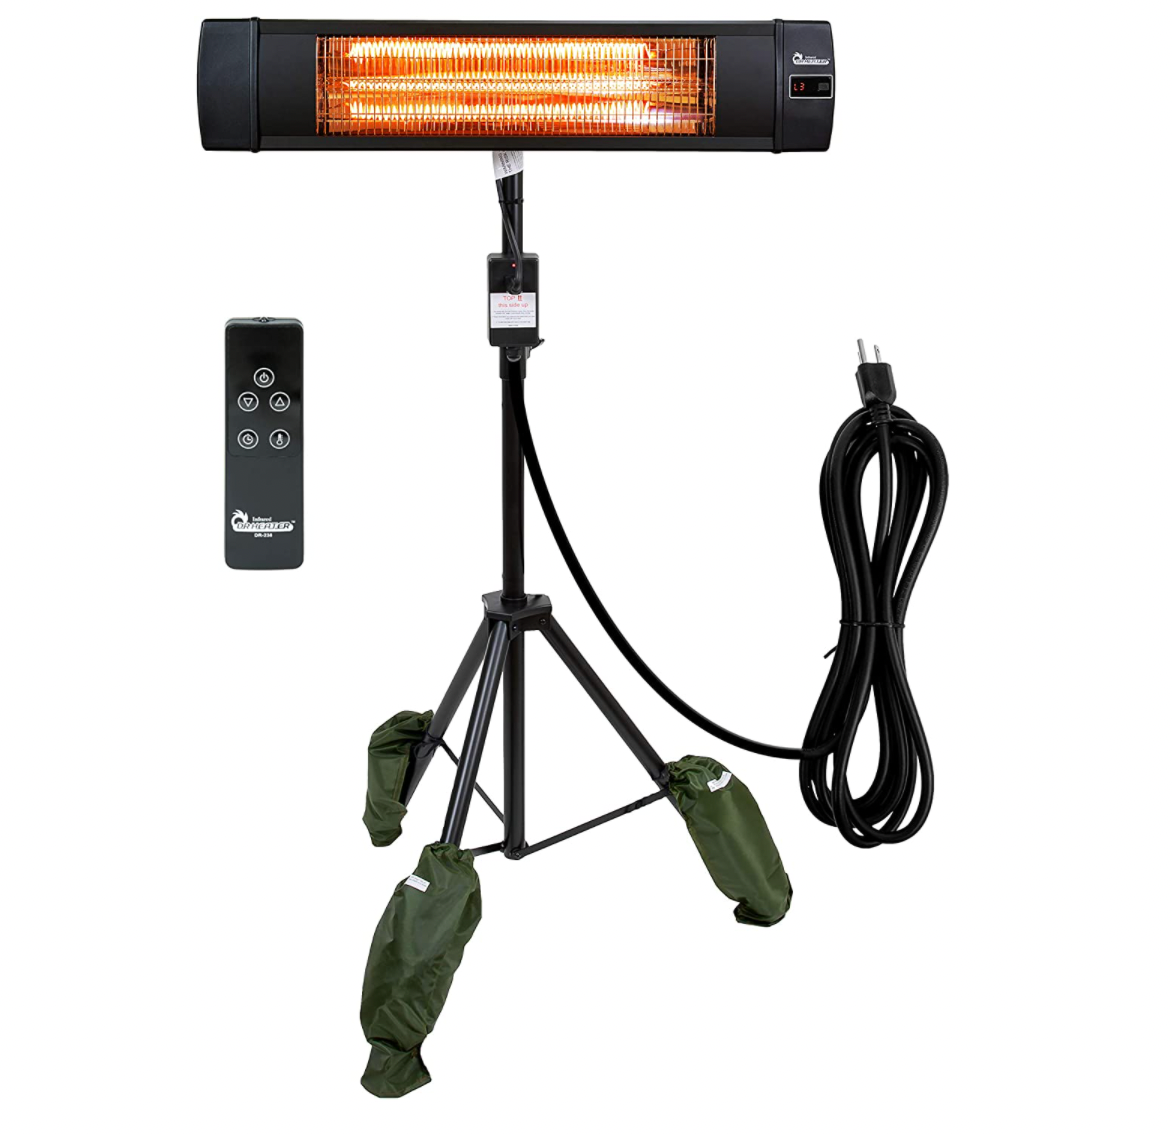 Dr Infrared Heater DR-338 Carbon Infrared Patio Heater